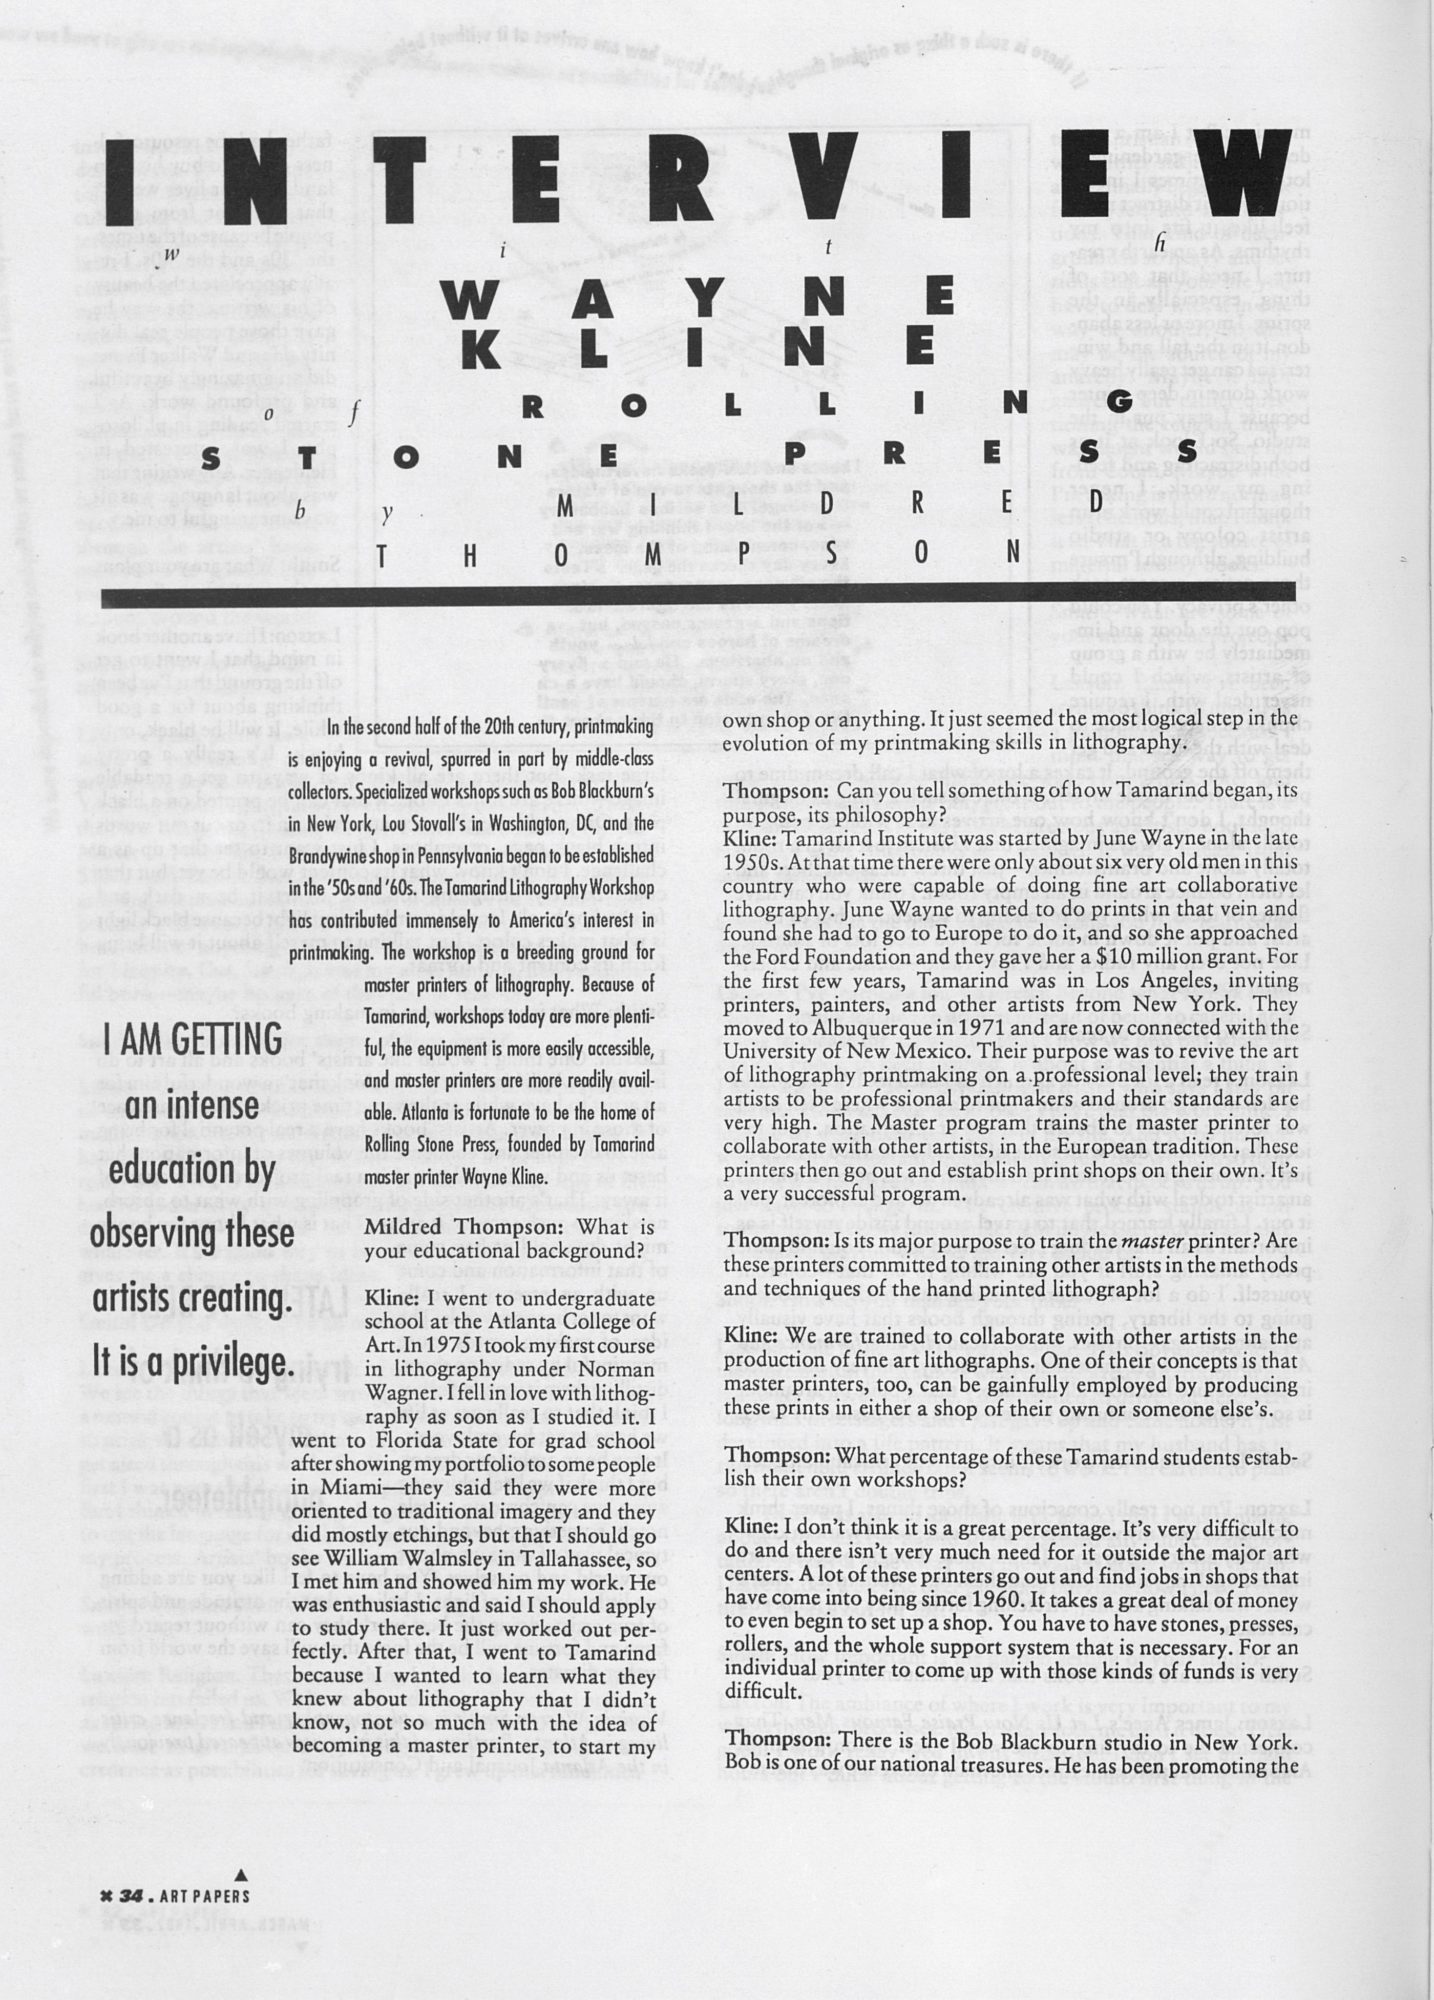 Scan of an interview between Mildred Thompson and Wayne Kline.